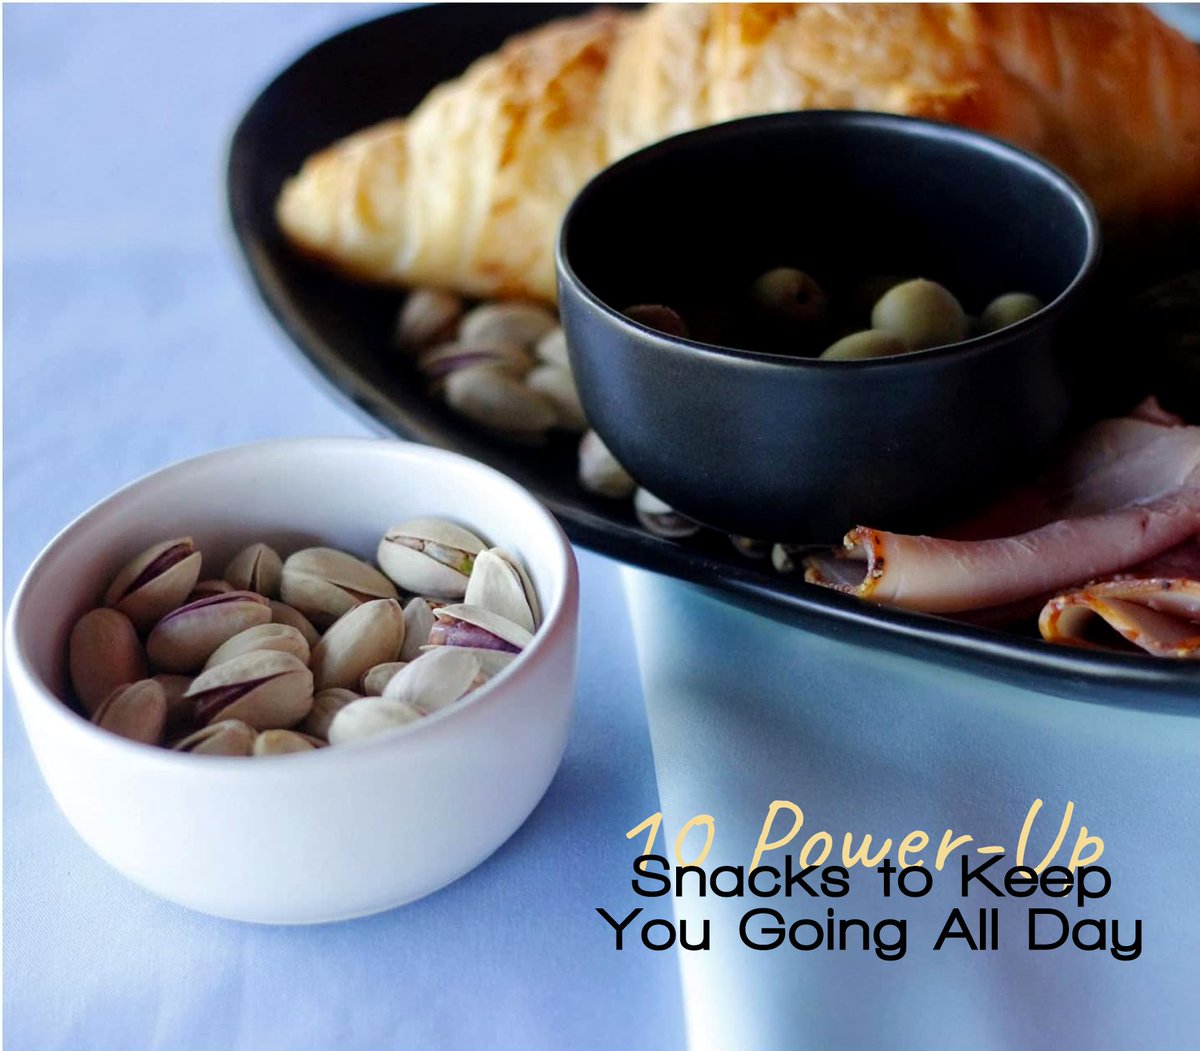 10 Power-Up Snacks to Keep You Going All Day 🌟
.
Delicious and healthy snacks that are popular and can keep you energized throughout the day.
.
Read More: pankesum.com/10-power-up-sn…
.
#HealthySnacks #SnackIdeas #DeliciousNutrition #HealthyLiving #PlatingTechniques #ceramicplates